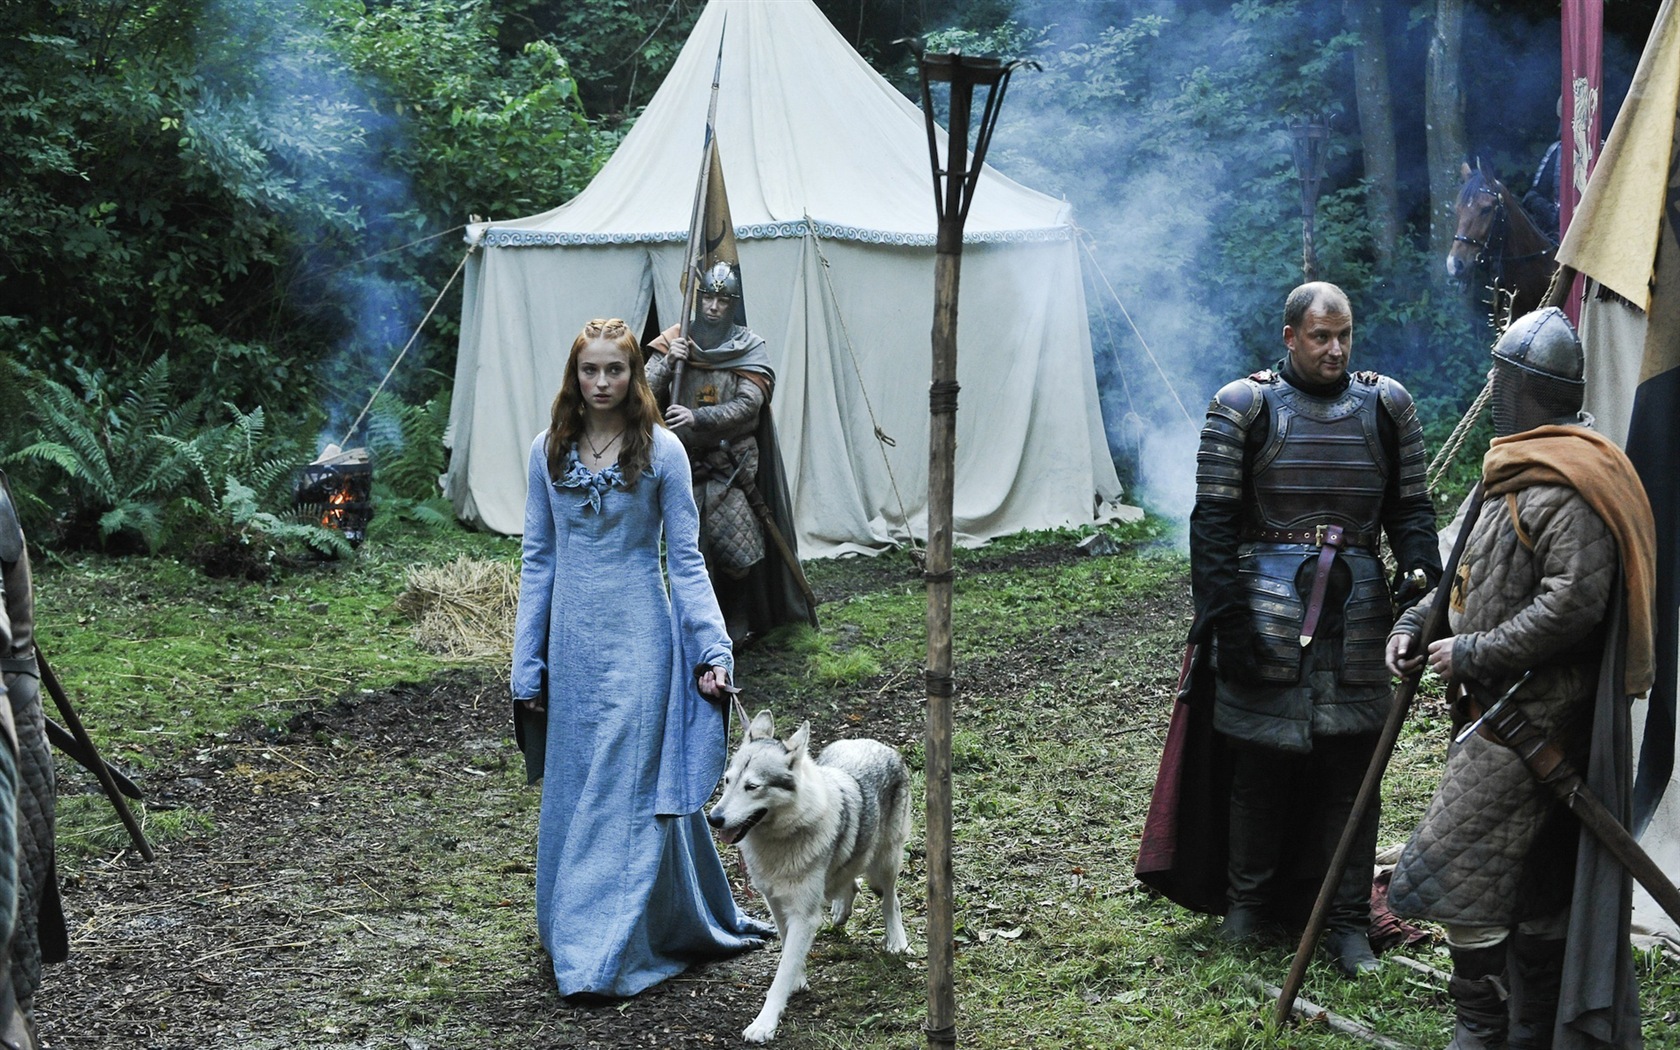 A Song of Ice and Fire: Game of Thrones 冰與火之歌：權力的遊戲高清壁紙 #46 - 1680x1050